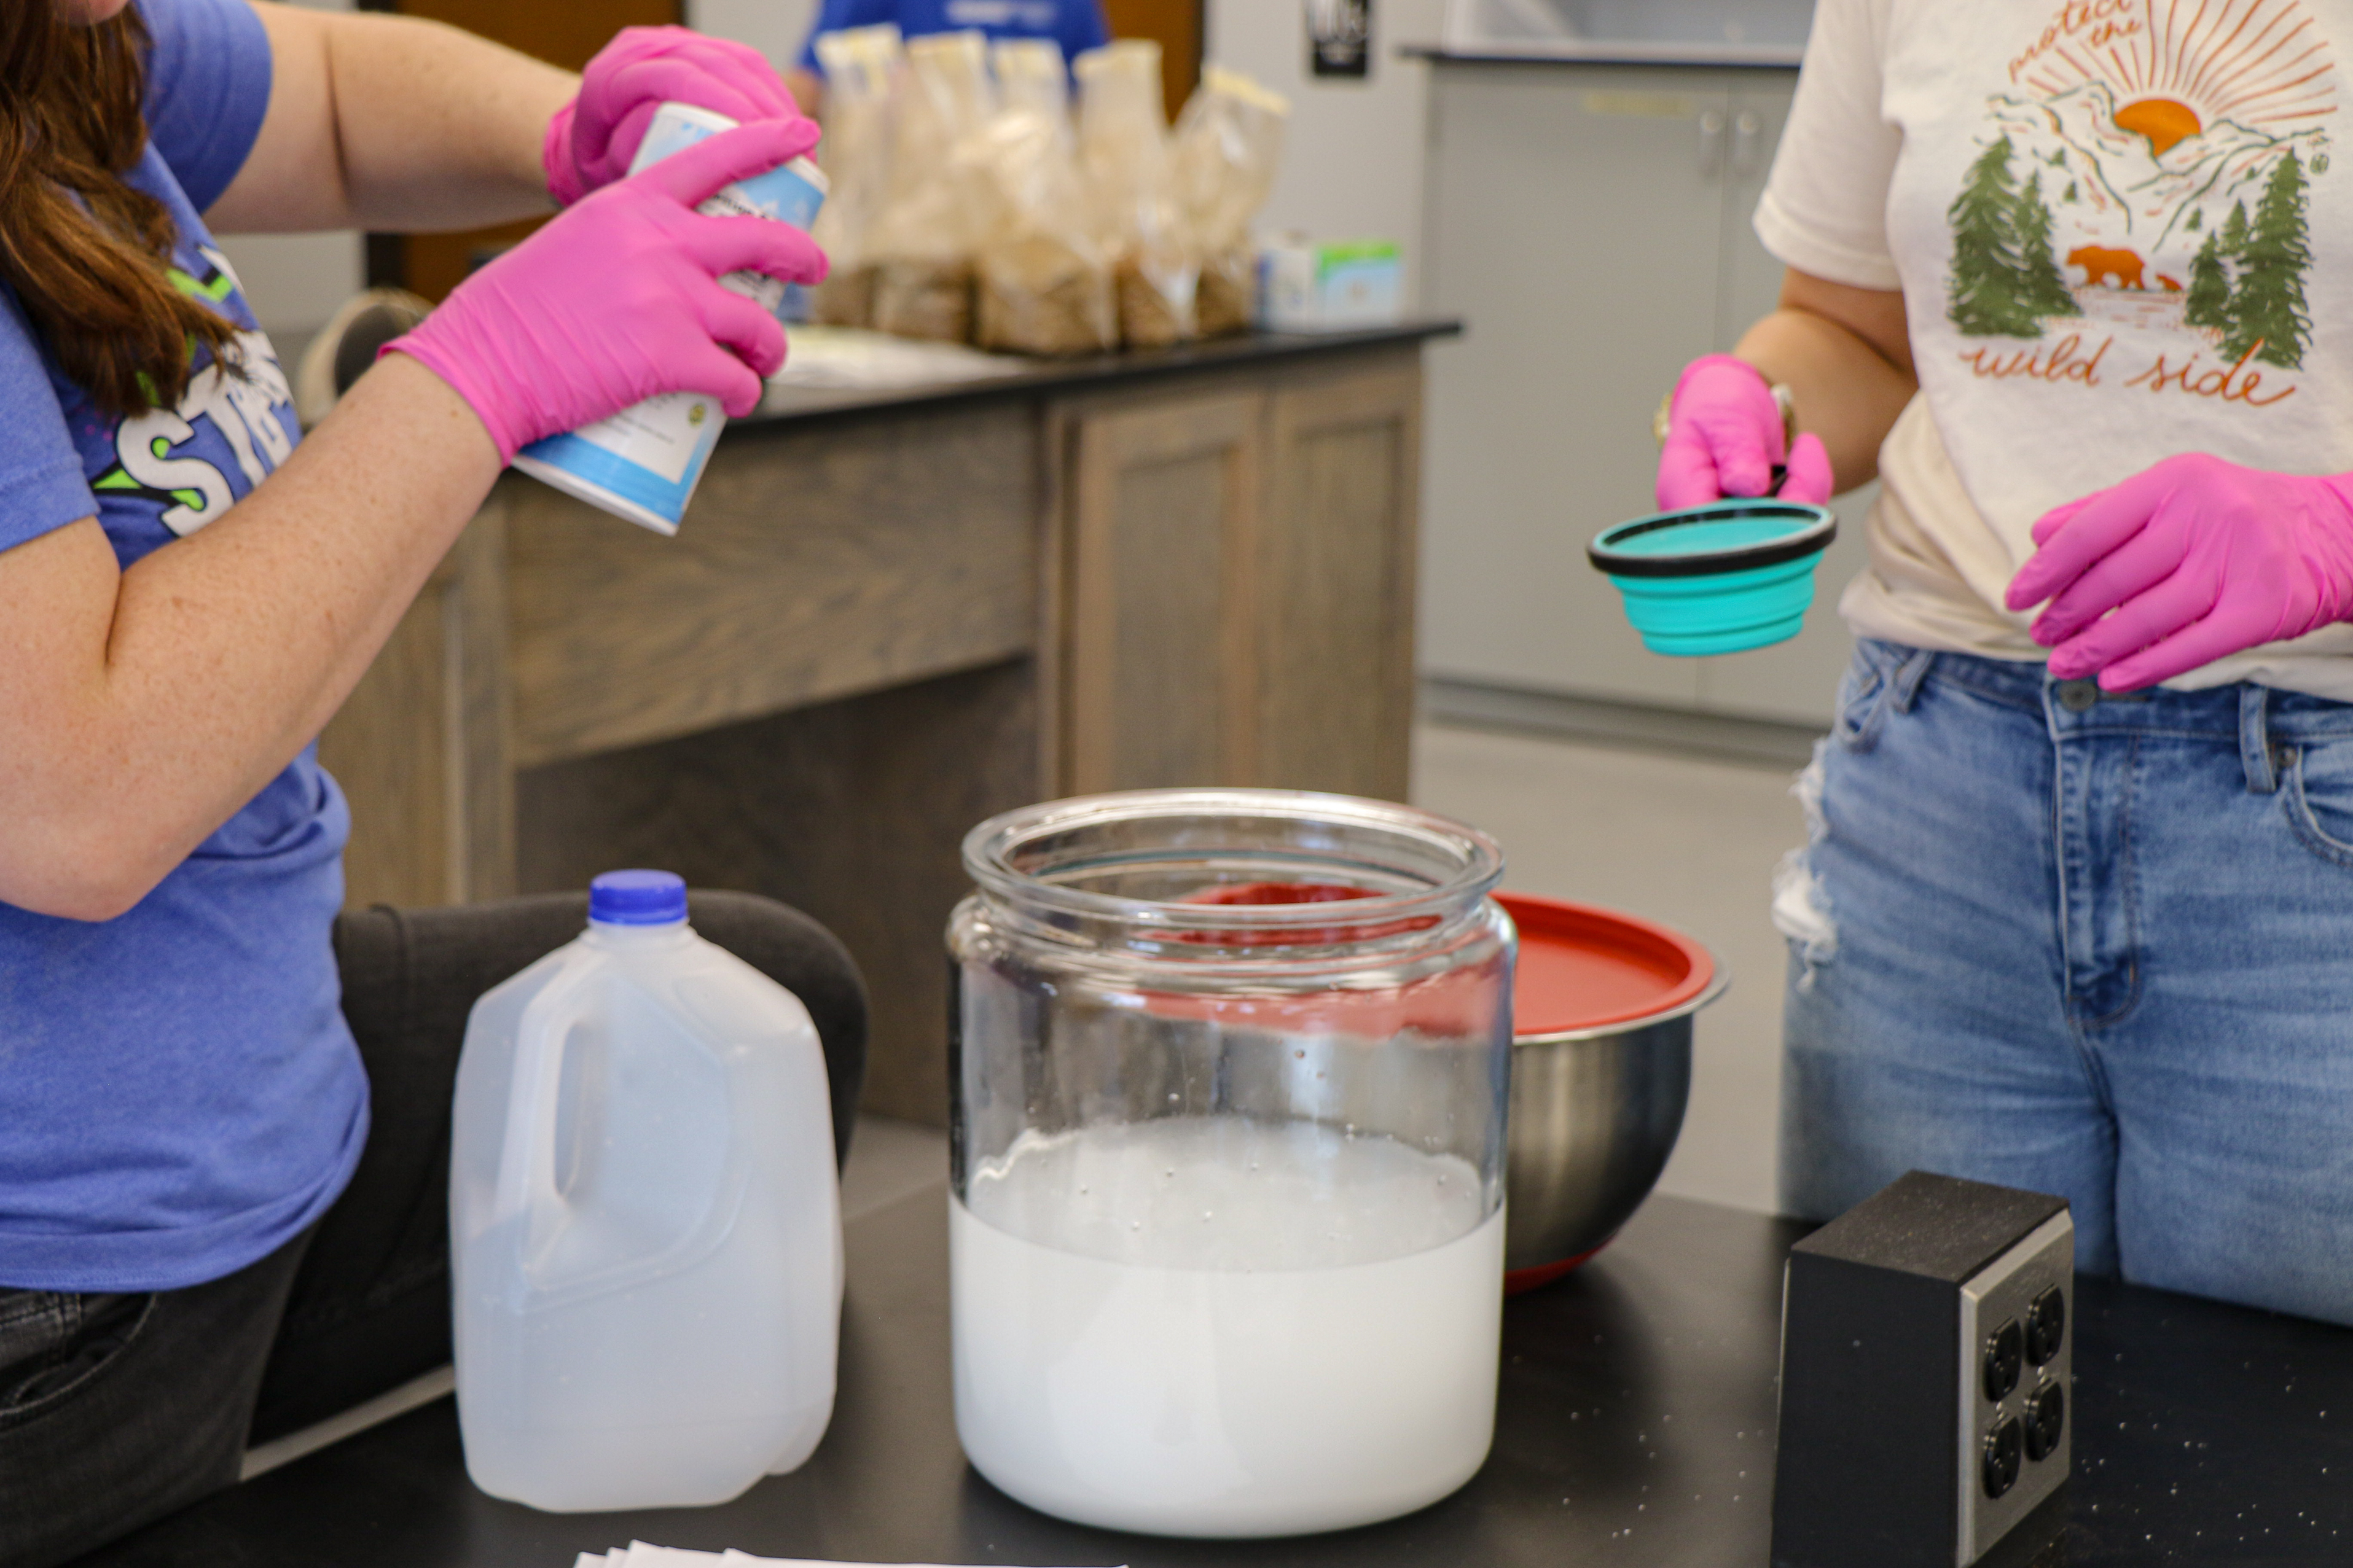 Students mixing a solution in the lab classroom.